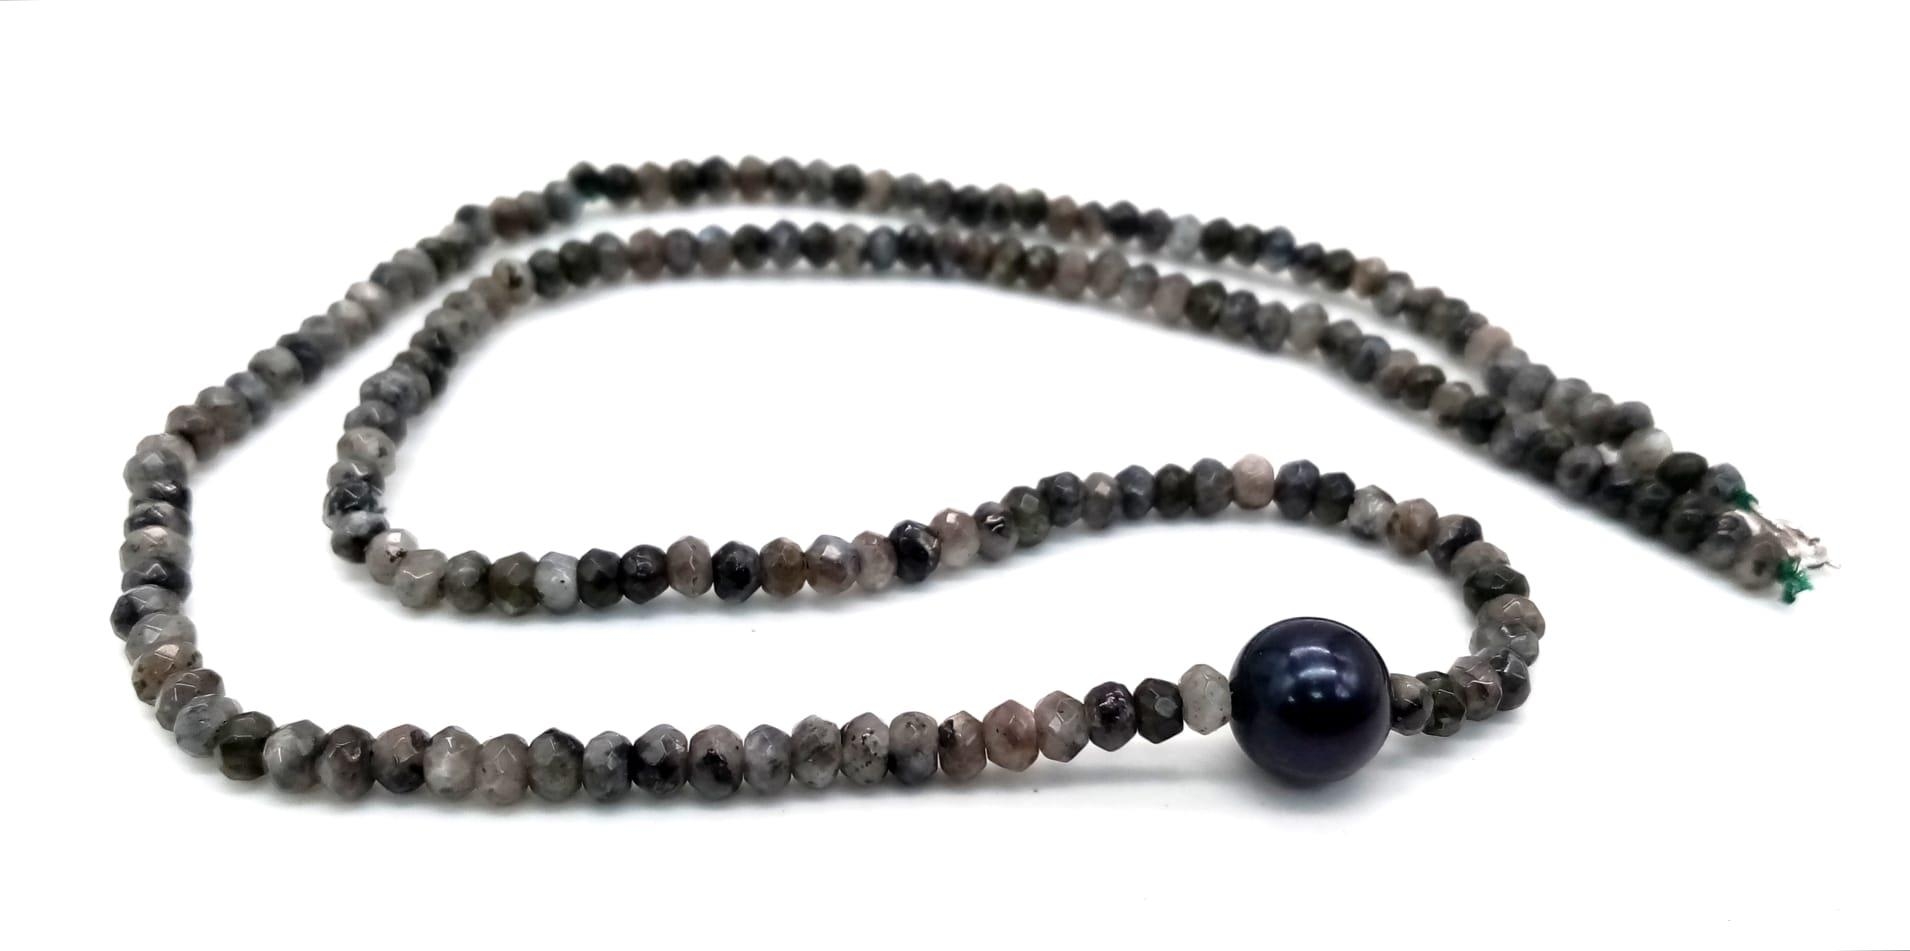 A Jasper Small Bead Necklace with a Cultured Pearl Interrupter. 50cm length. 14k gold clasp. - Image 3 of 4